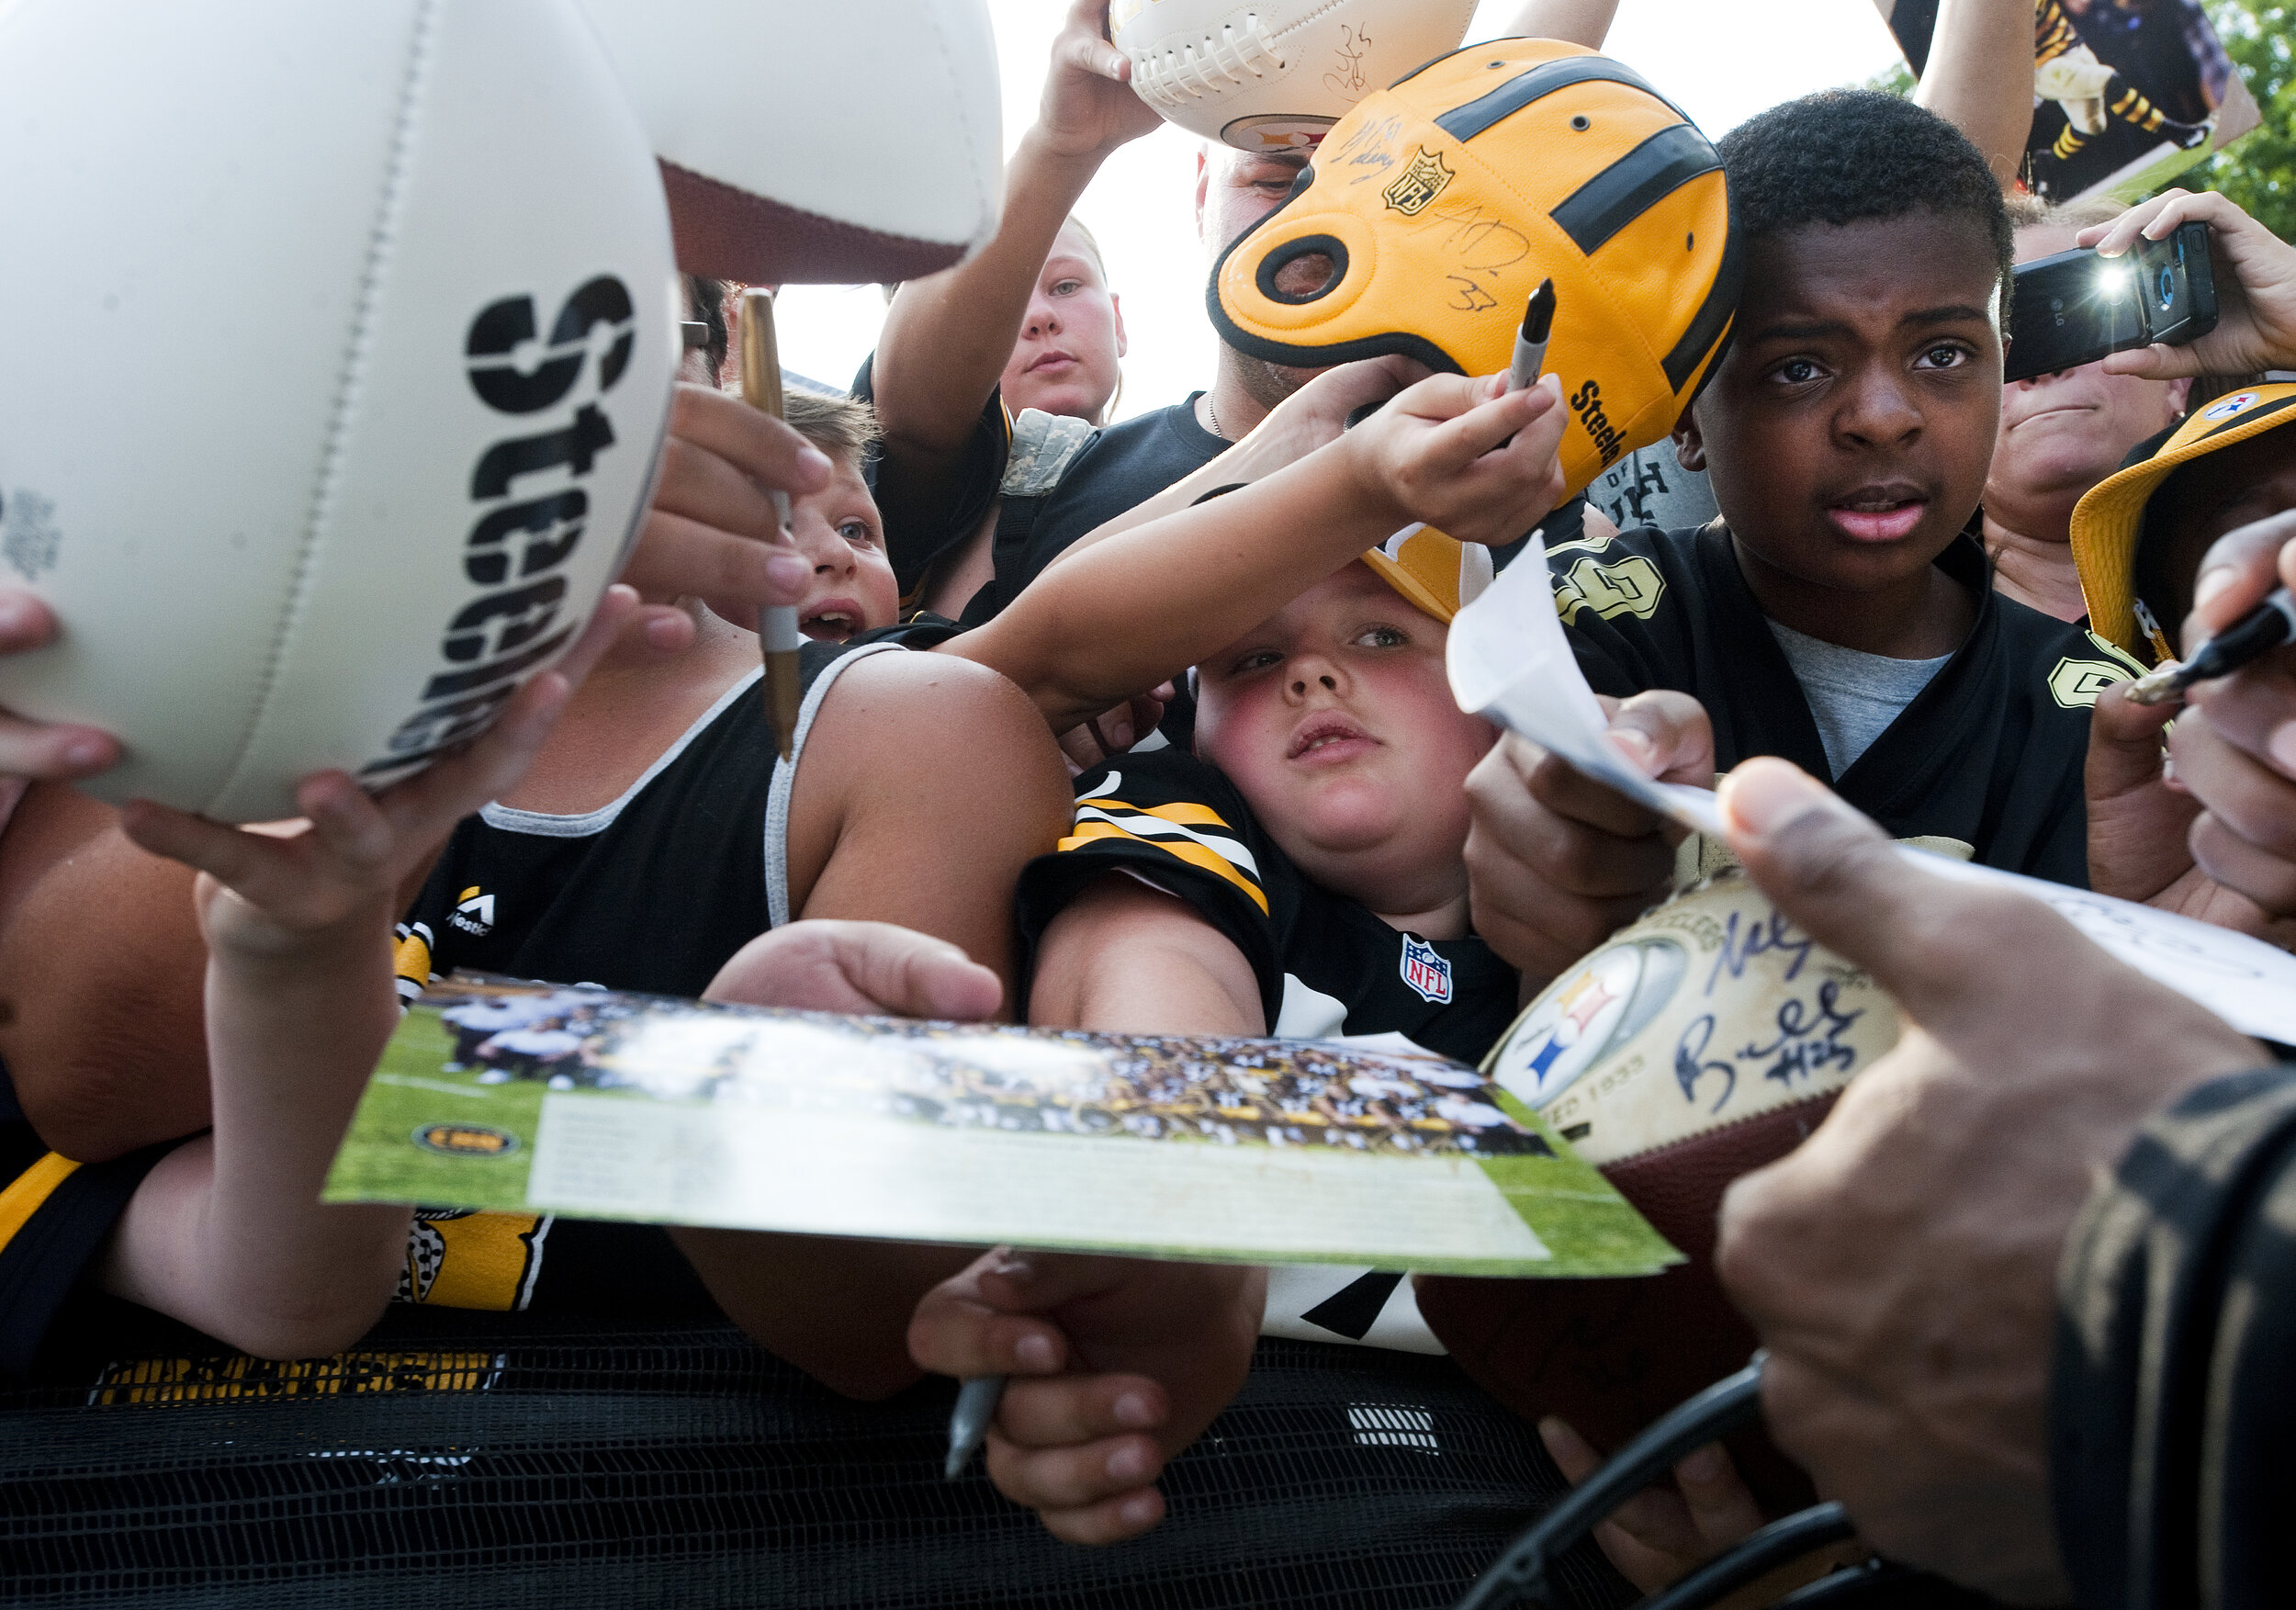  A young fan is sandwiched between others while waiting for Le'Veon Bell to sign autographs during the first day of Pittsburgh Steelers training camp on Sunday, July 26, 2015 at St. Vincent College in Unity. 